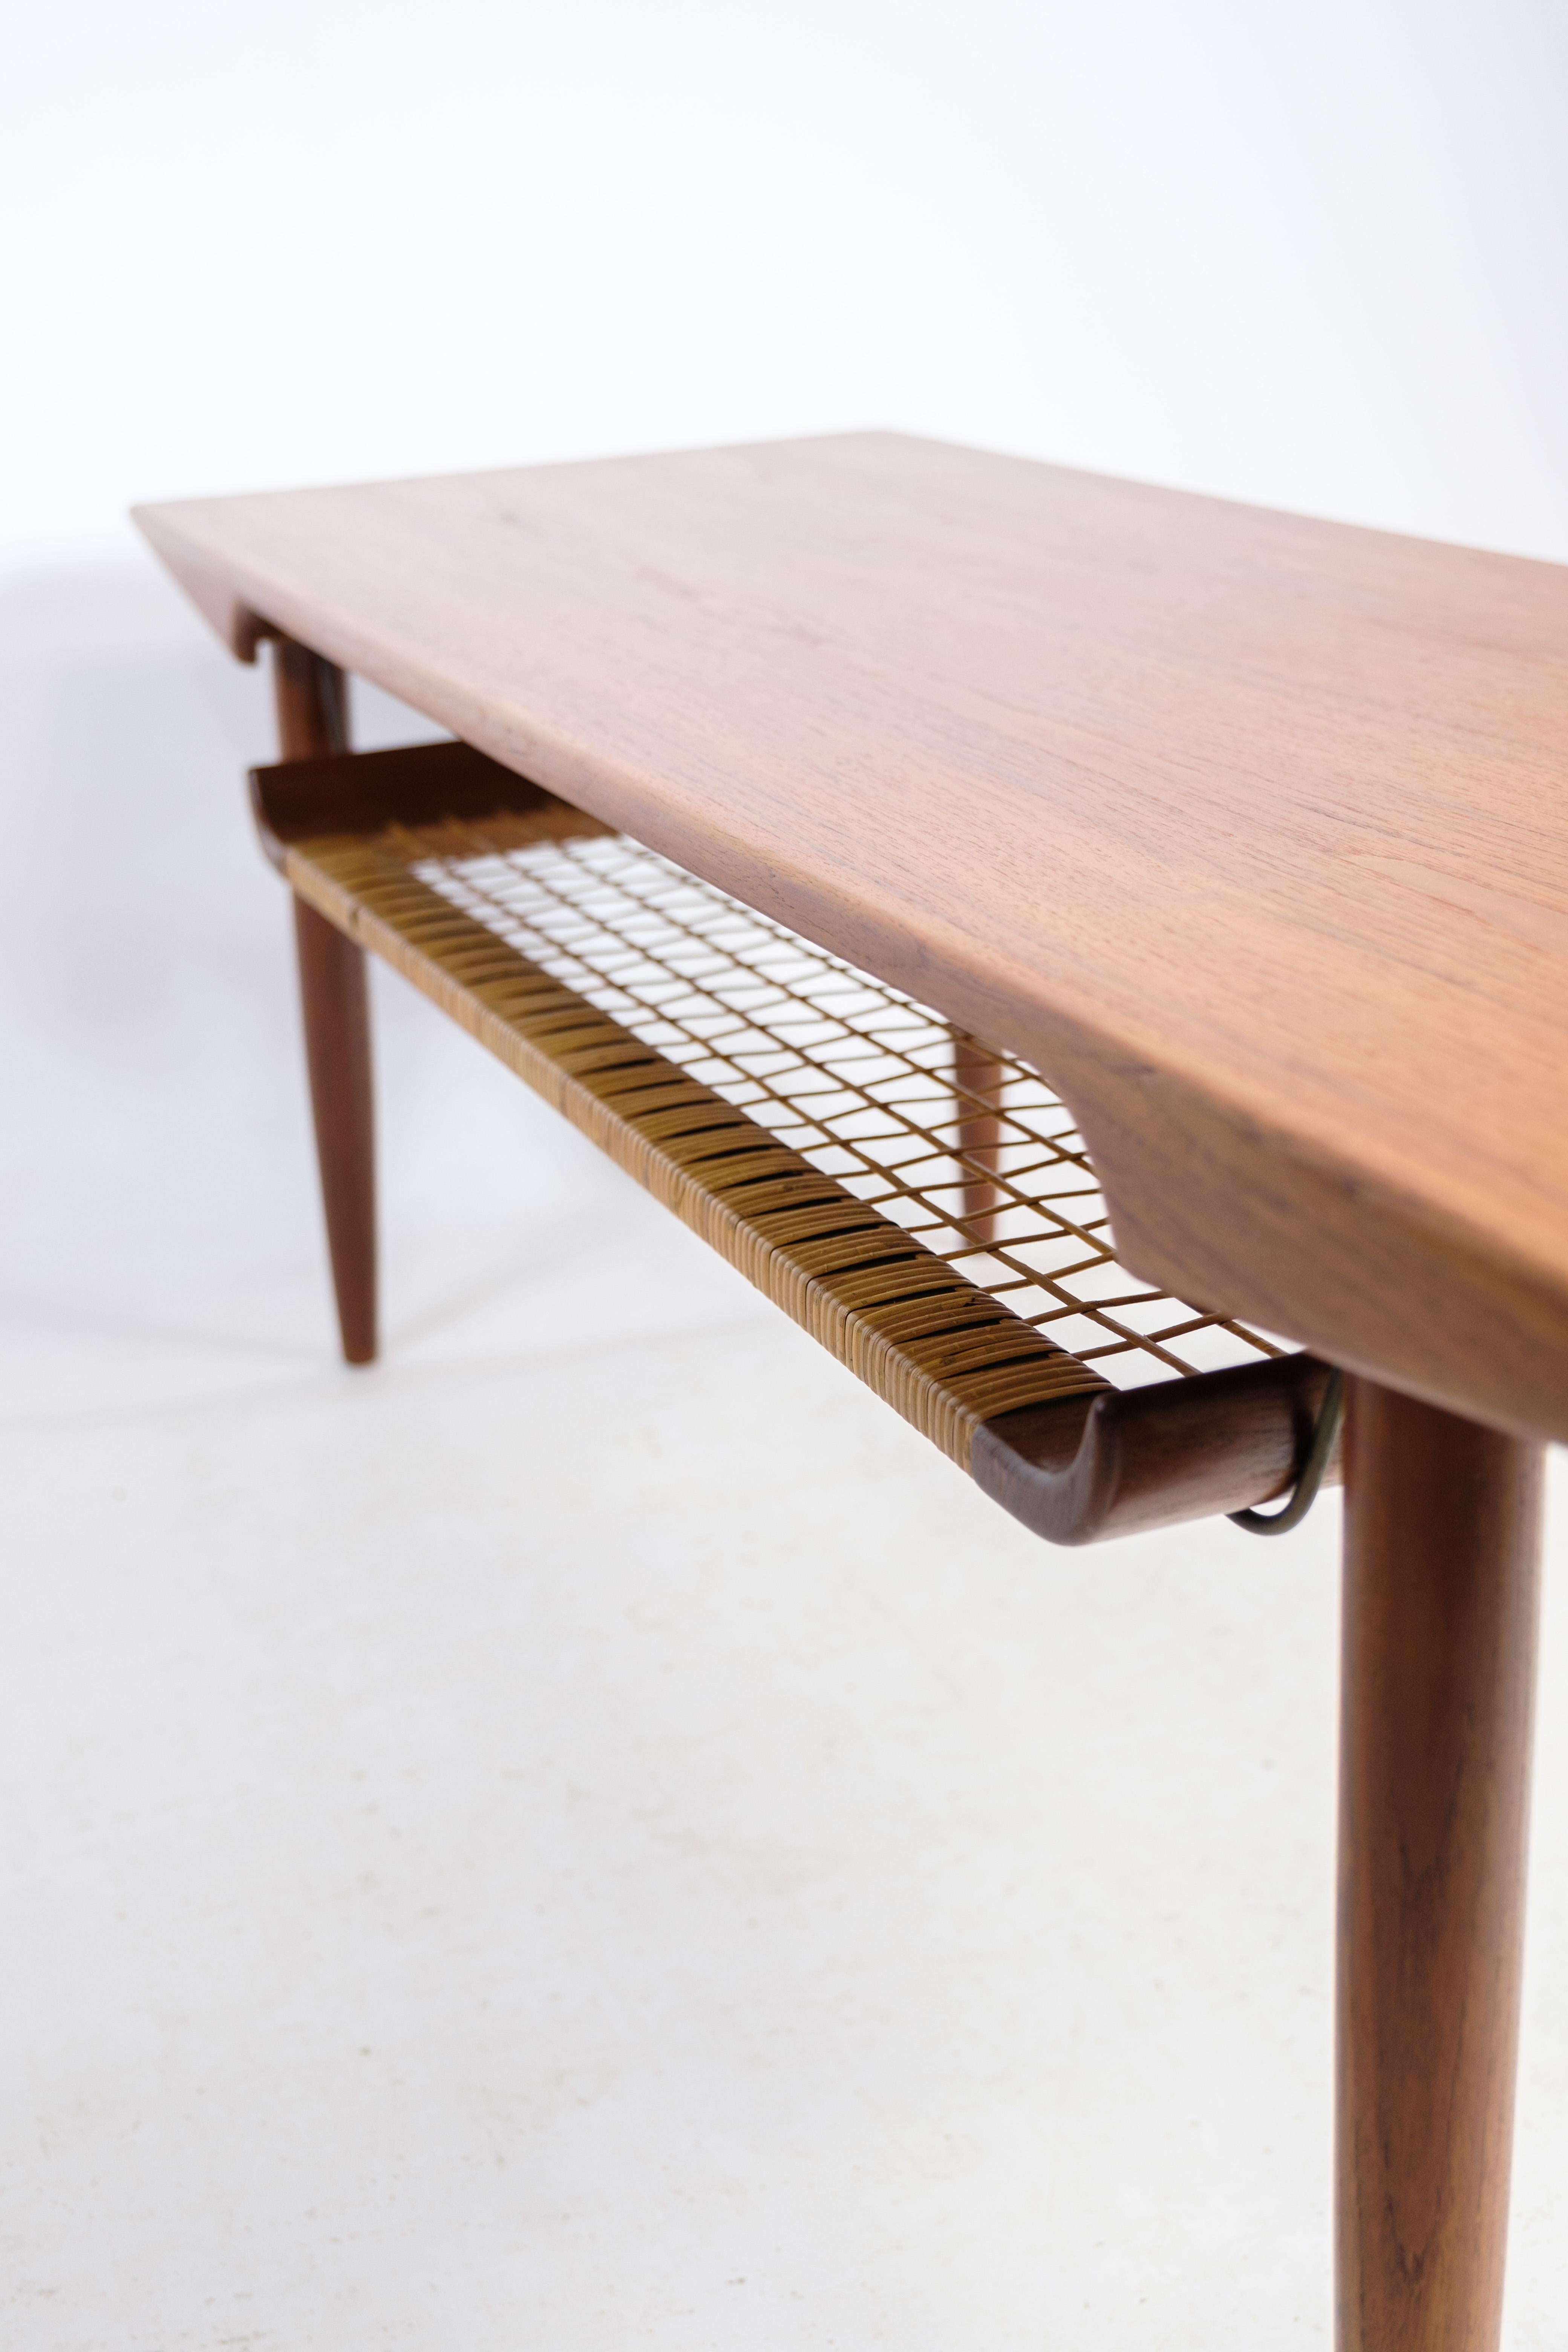 Mid-20th Century Coffee Table in Teak and Paper Cord Shelf of Danish Design from the 1960s For Sale